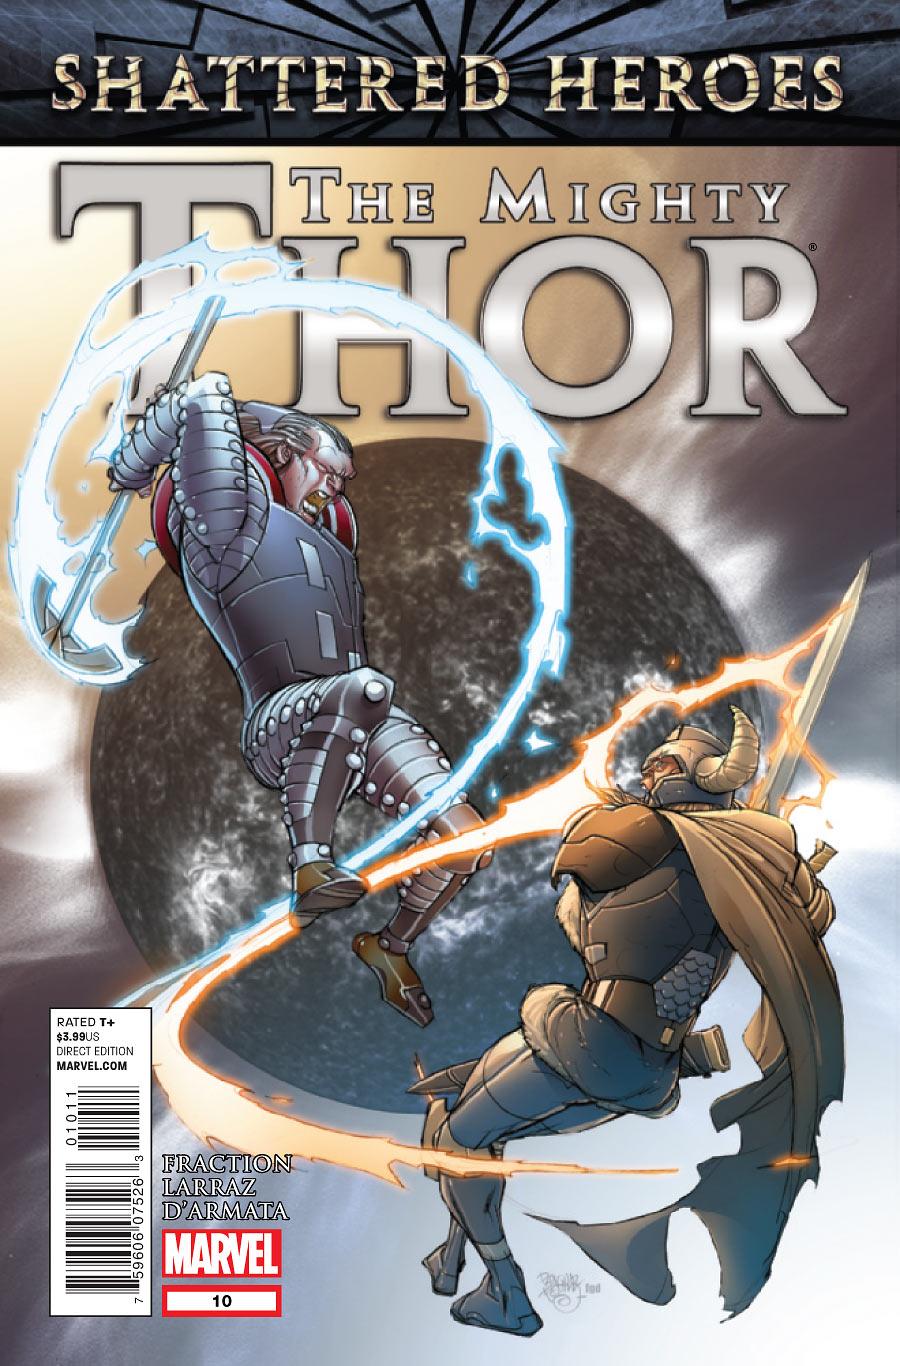 The Mighty Thor Vol. 1 #10